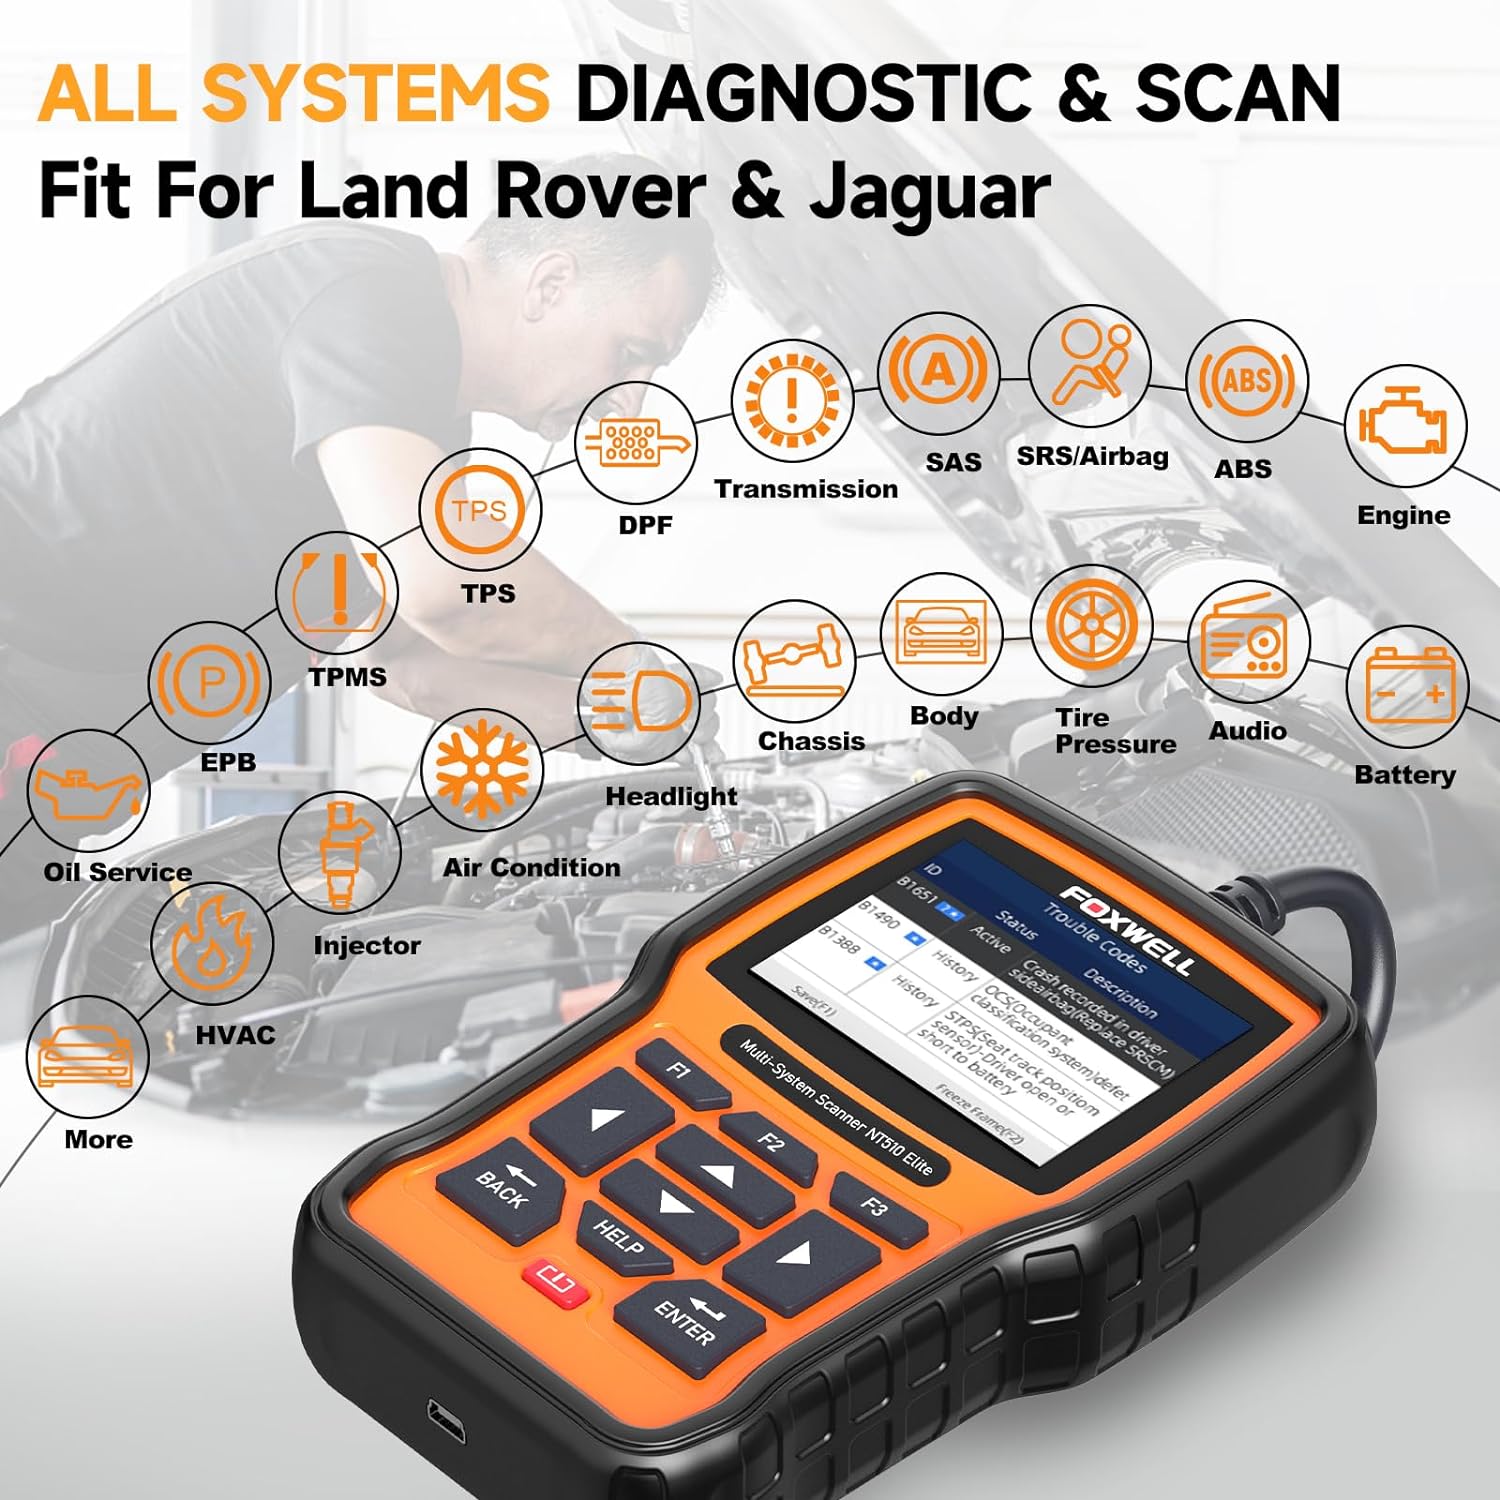 The OBD2 Scanner Check |Foxwell